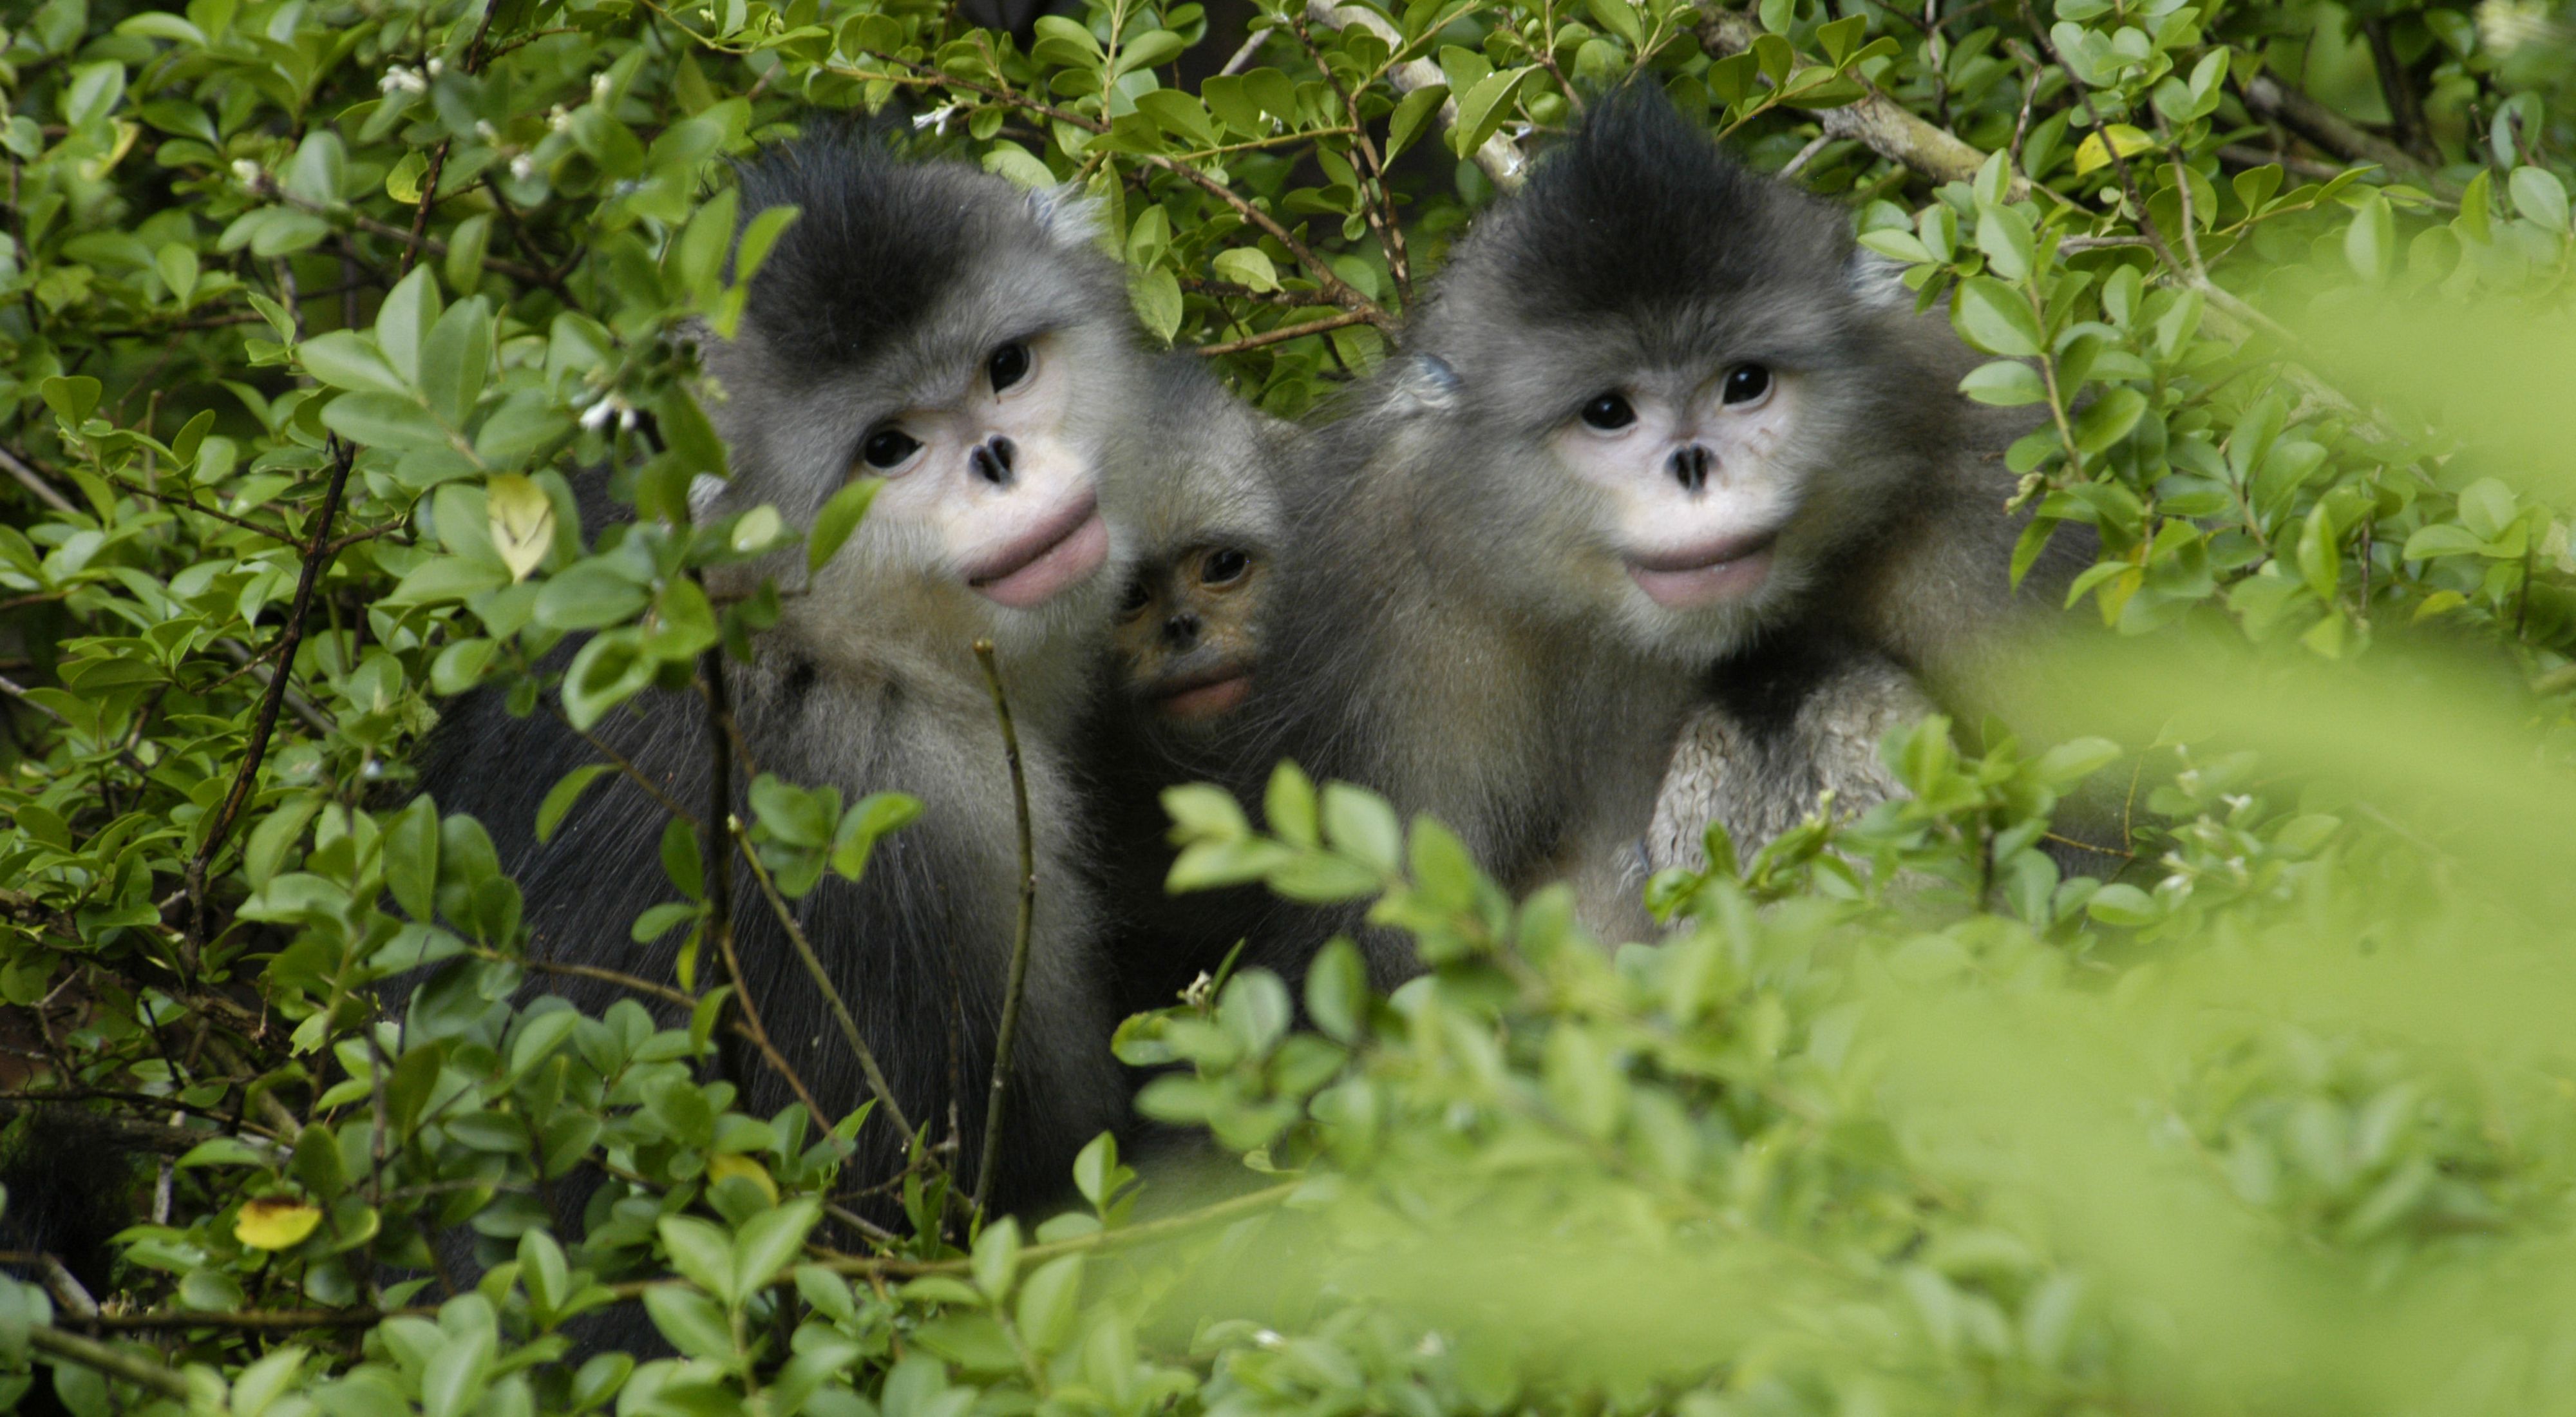 are considered one of the most endangered primates on Earth.